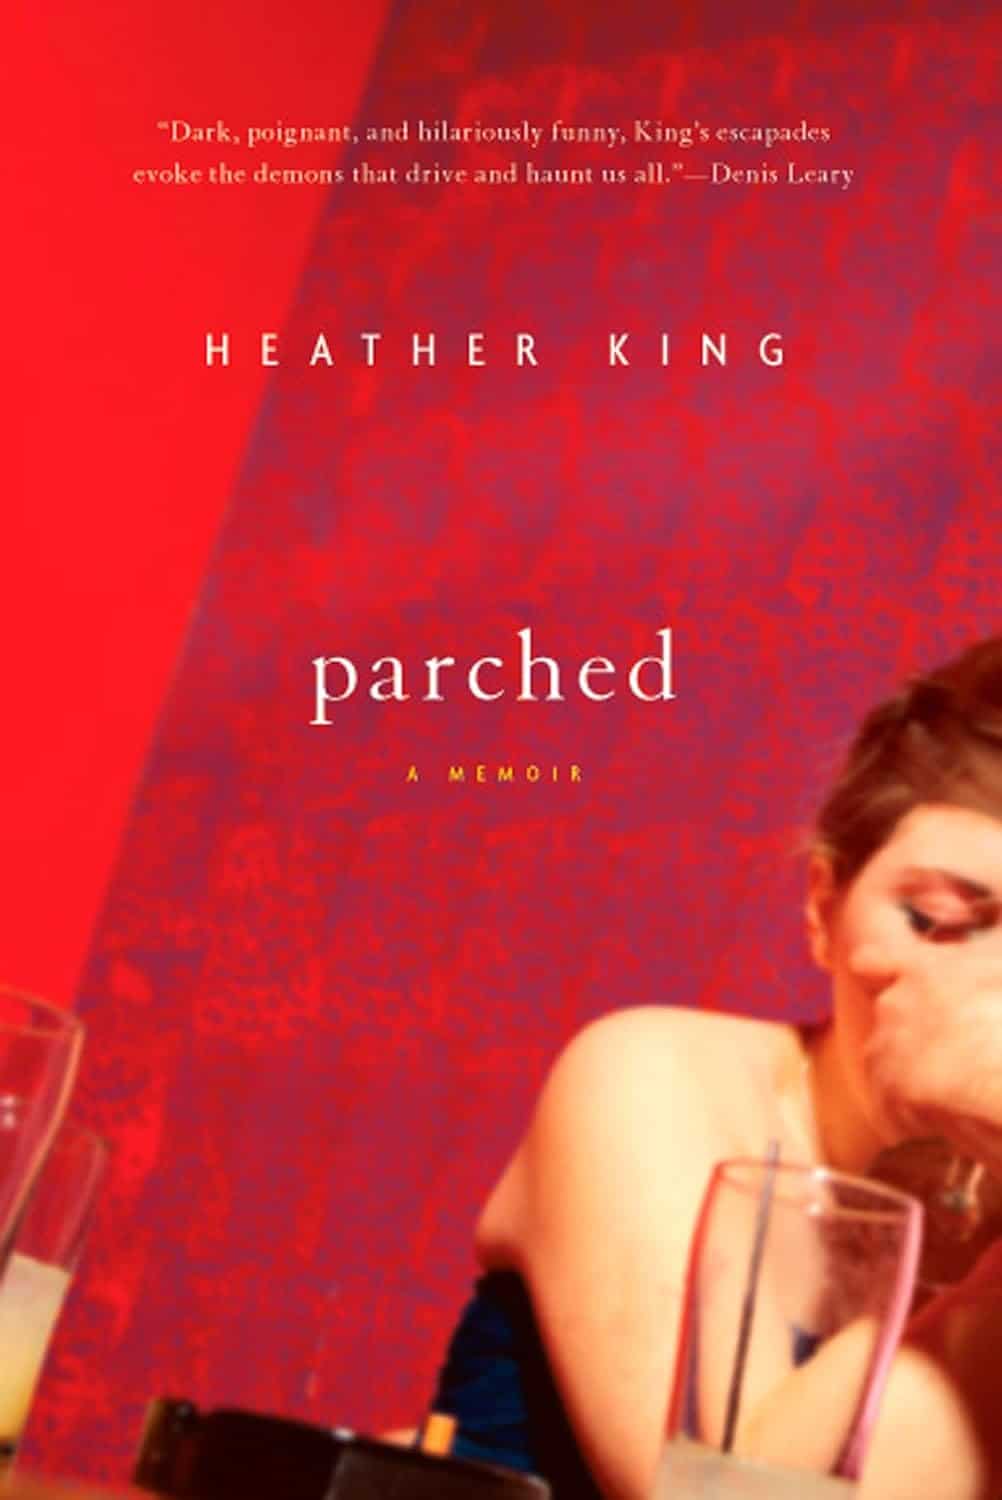 Parched: A Memoir by Heather King